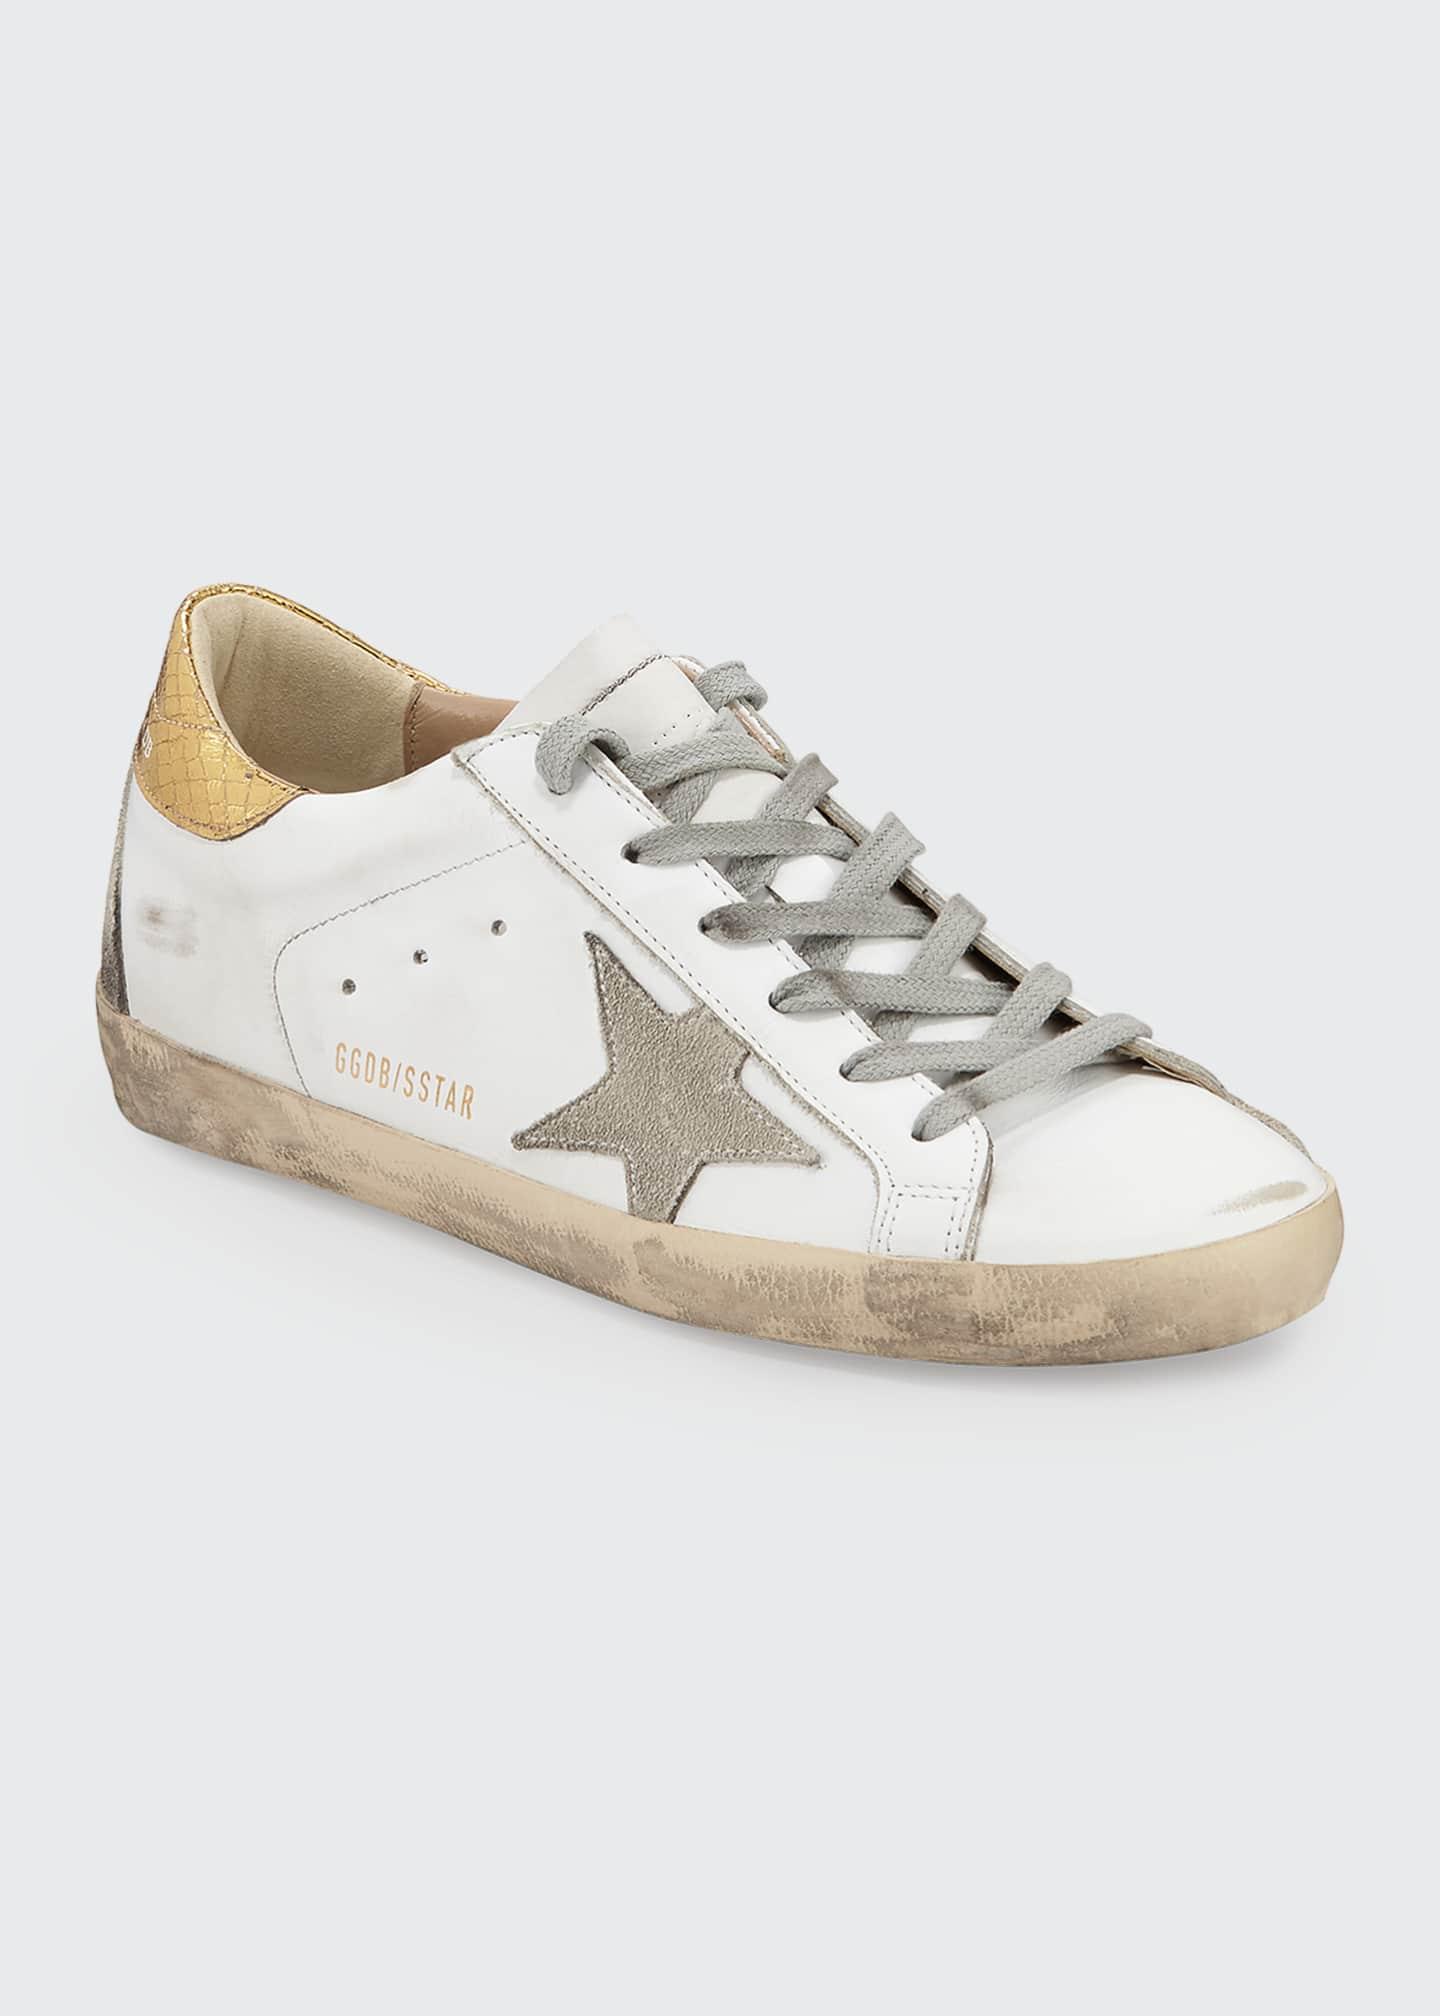 Golden Goose Superstar Leather Sneakers With Metallic Back Sale 